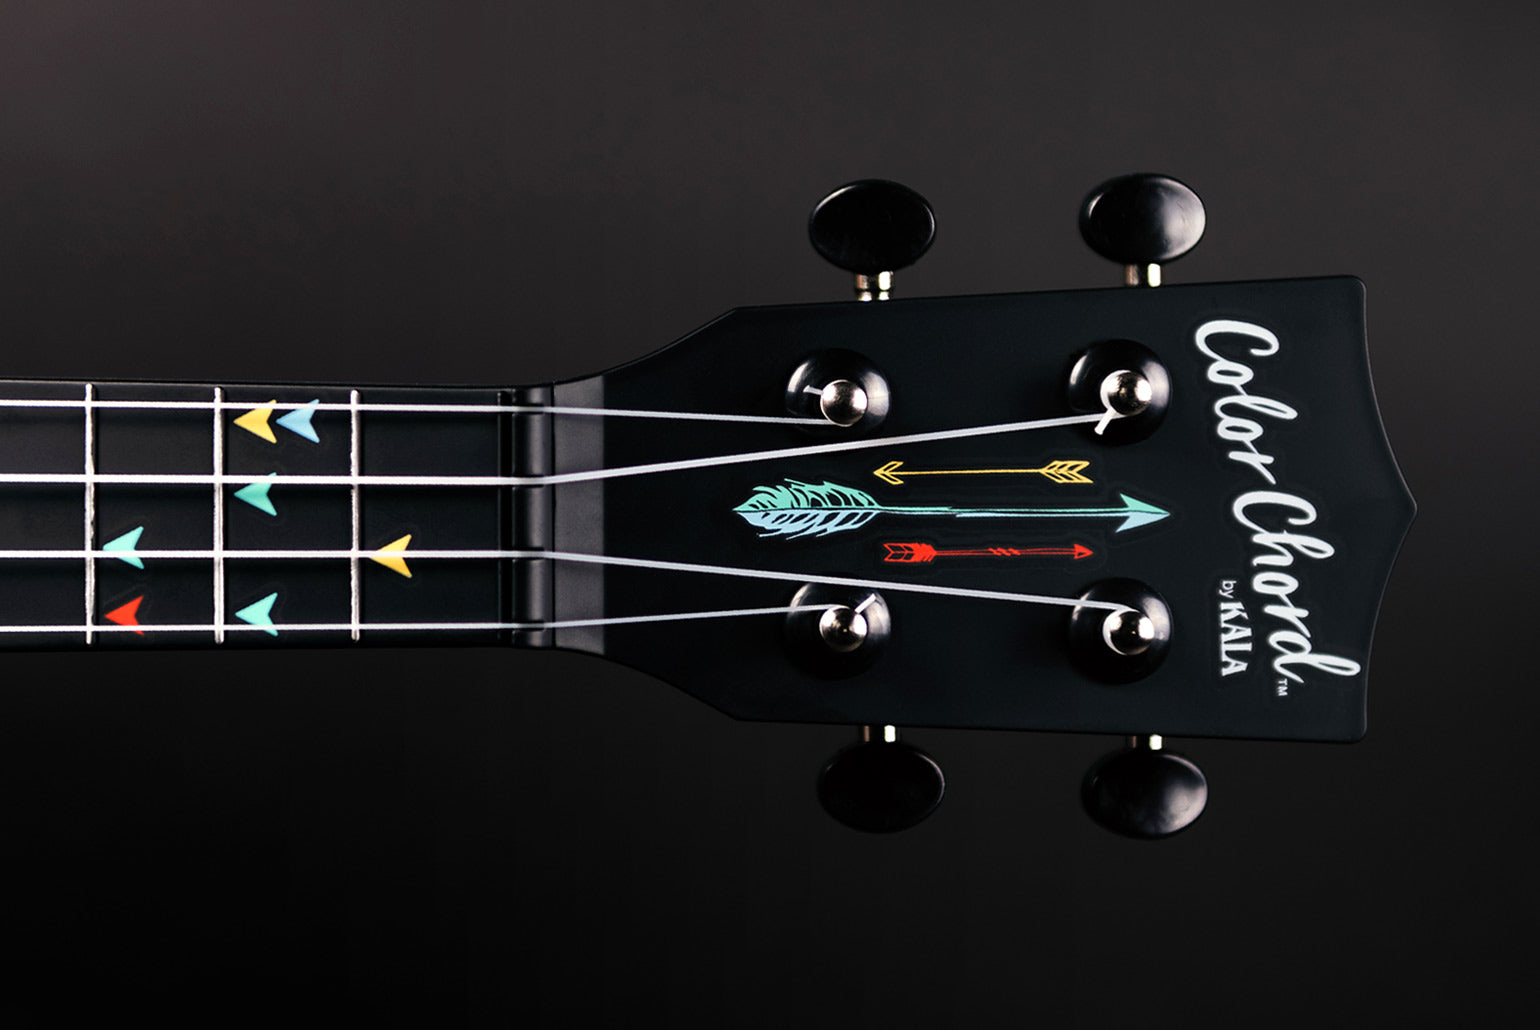 Kala Color Chord™ Ukulele Fretboard with Arrow Markers in four different colors: red, green, blue, an yellow. 